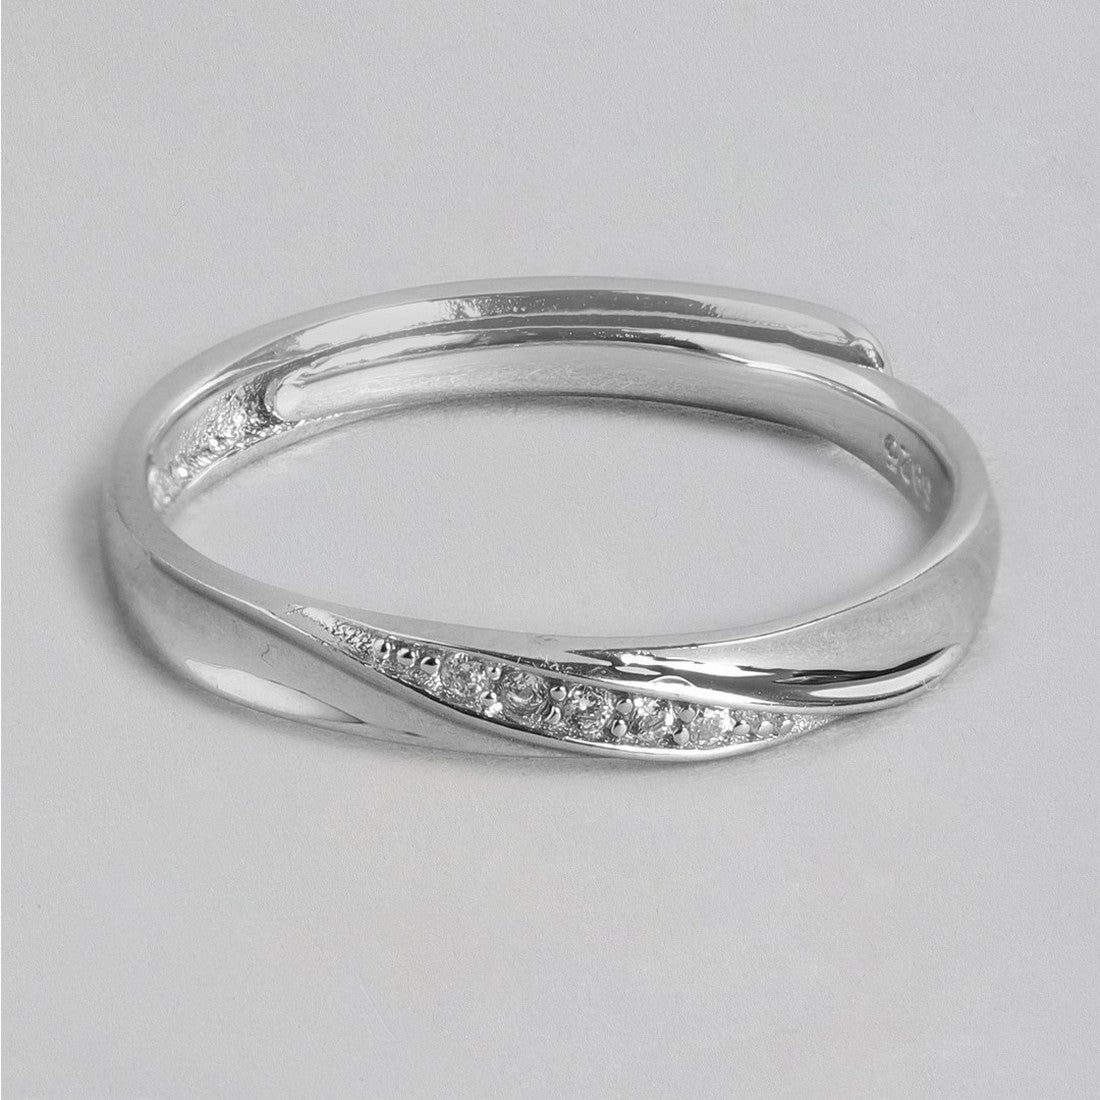 Minimal CZ Rhodium Plated 925 Sterling Silver Adjustable Ring For HER (Adjustable)